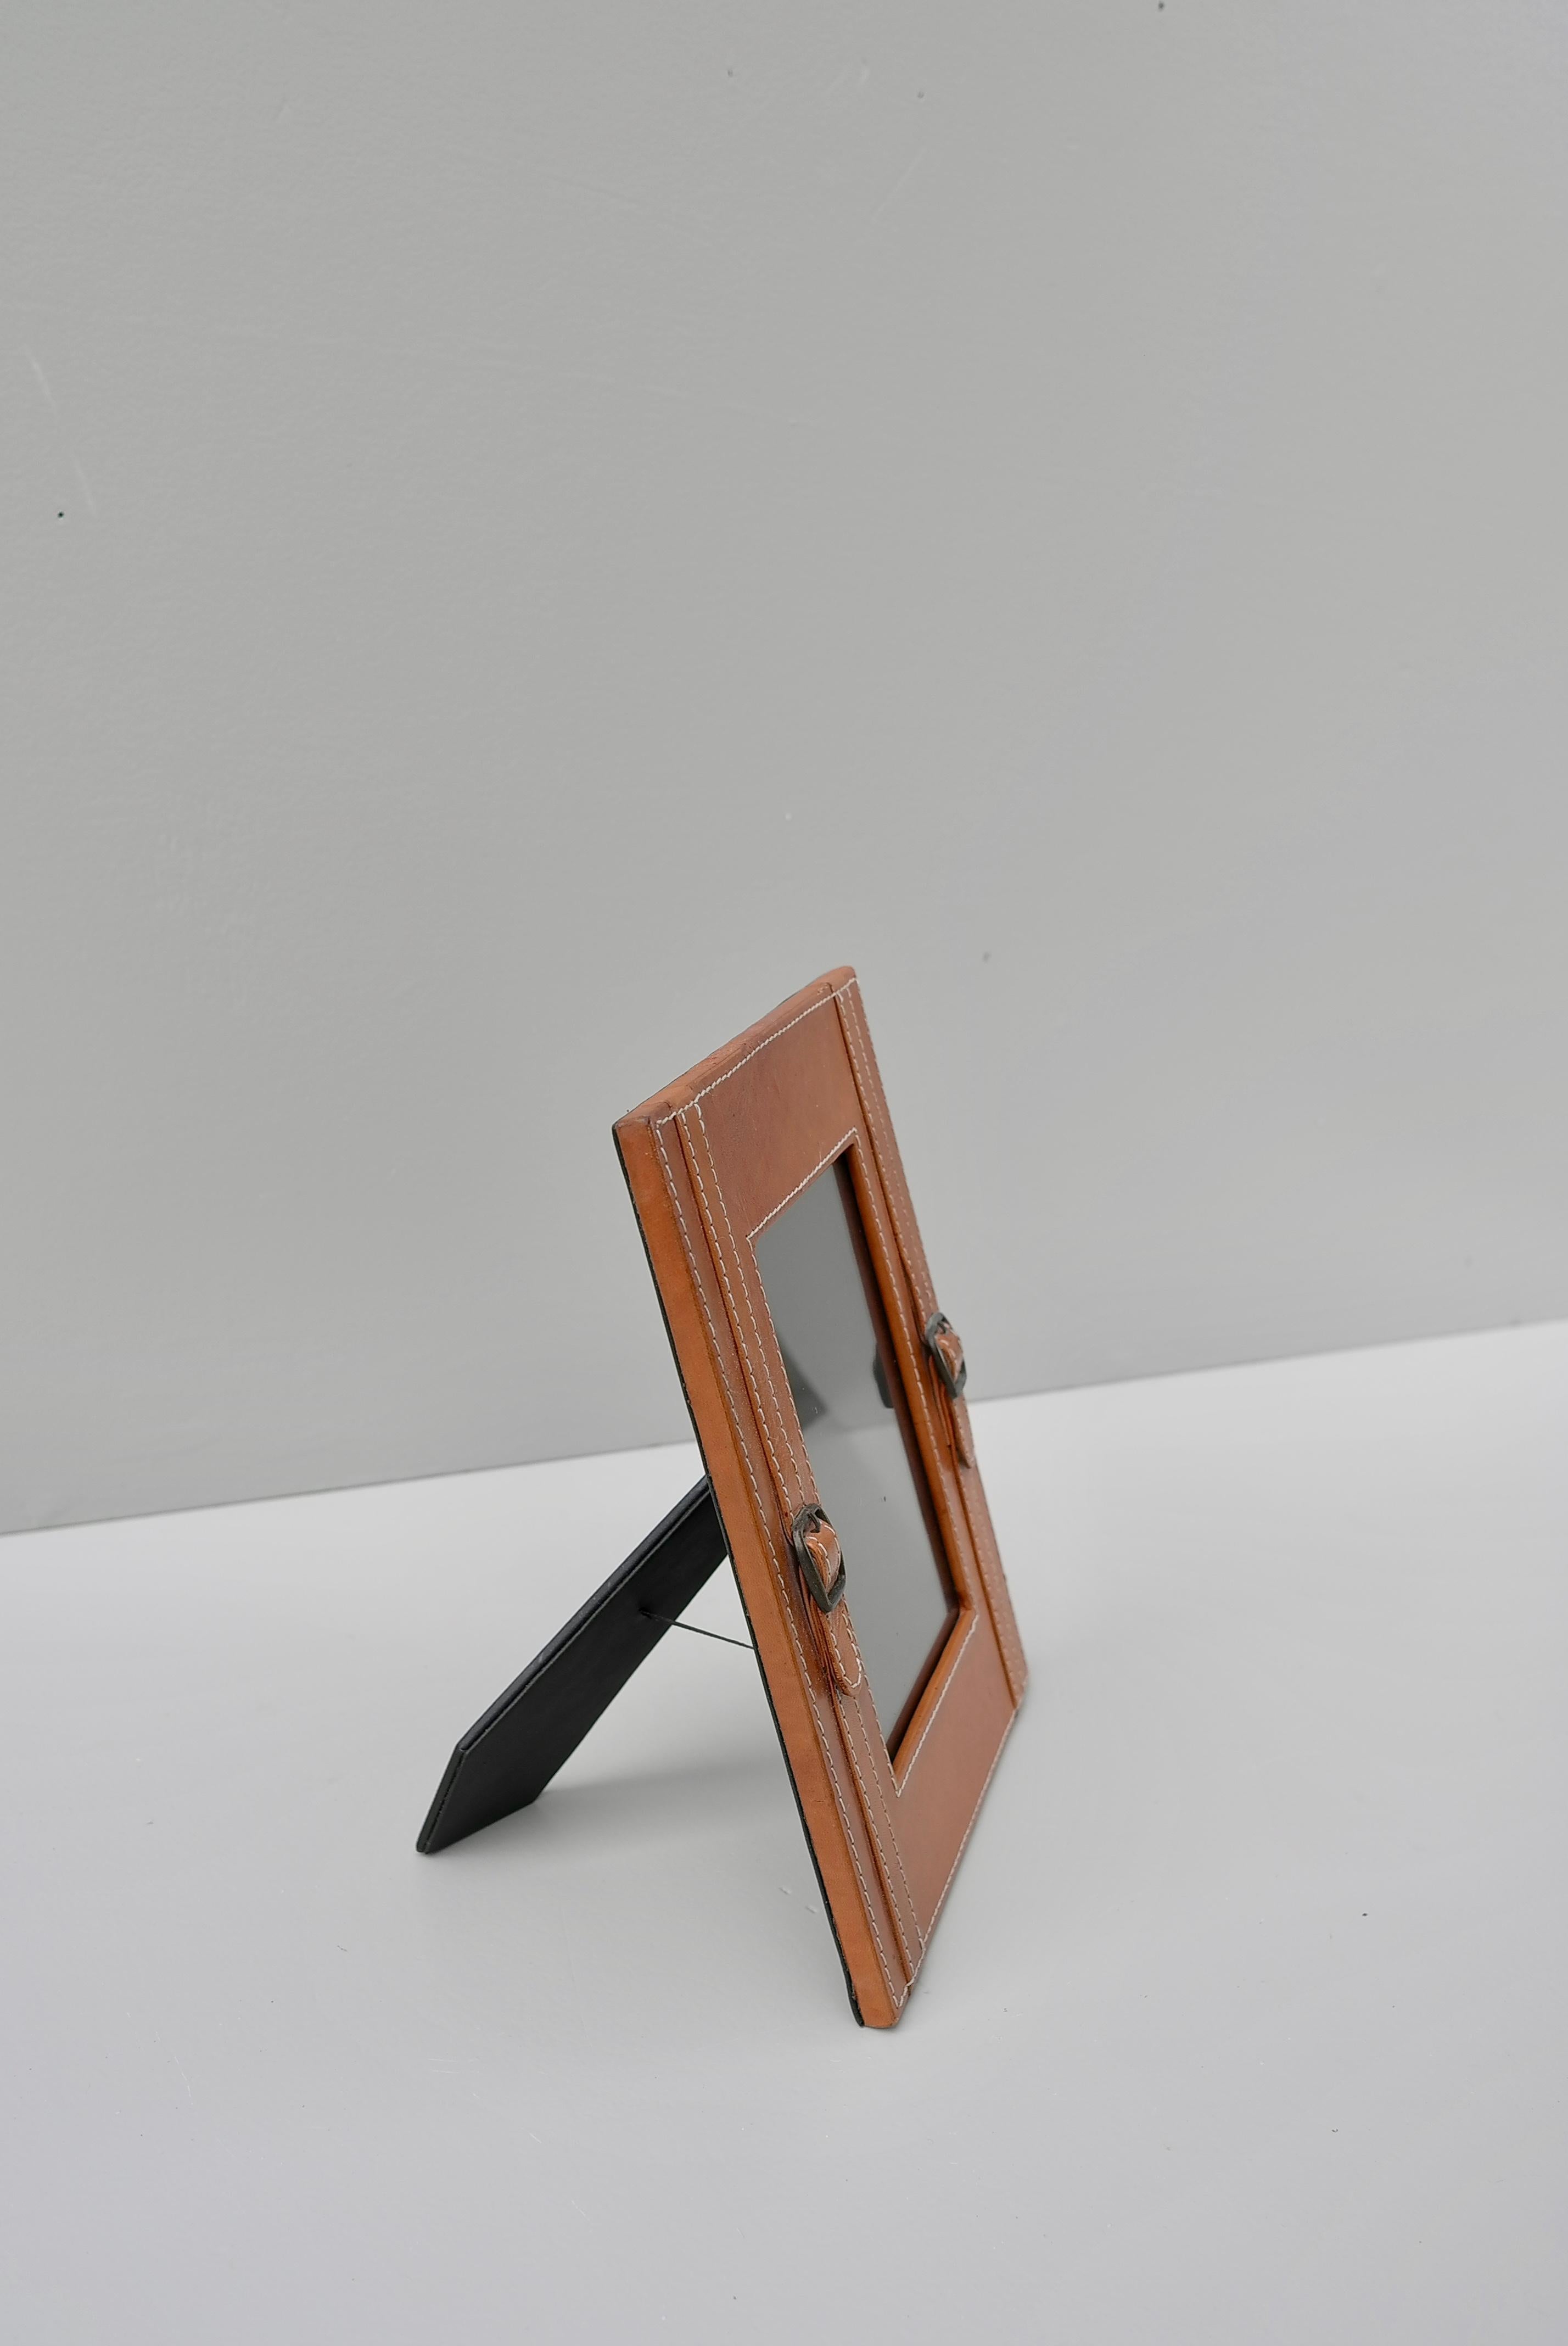 Hand-Stitched Cognac Leather Picture Frame in Style of Jacques Adnet In Good Condition For Sale In Den Haag, NL